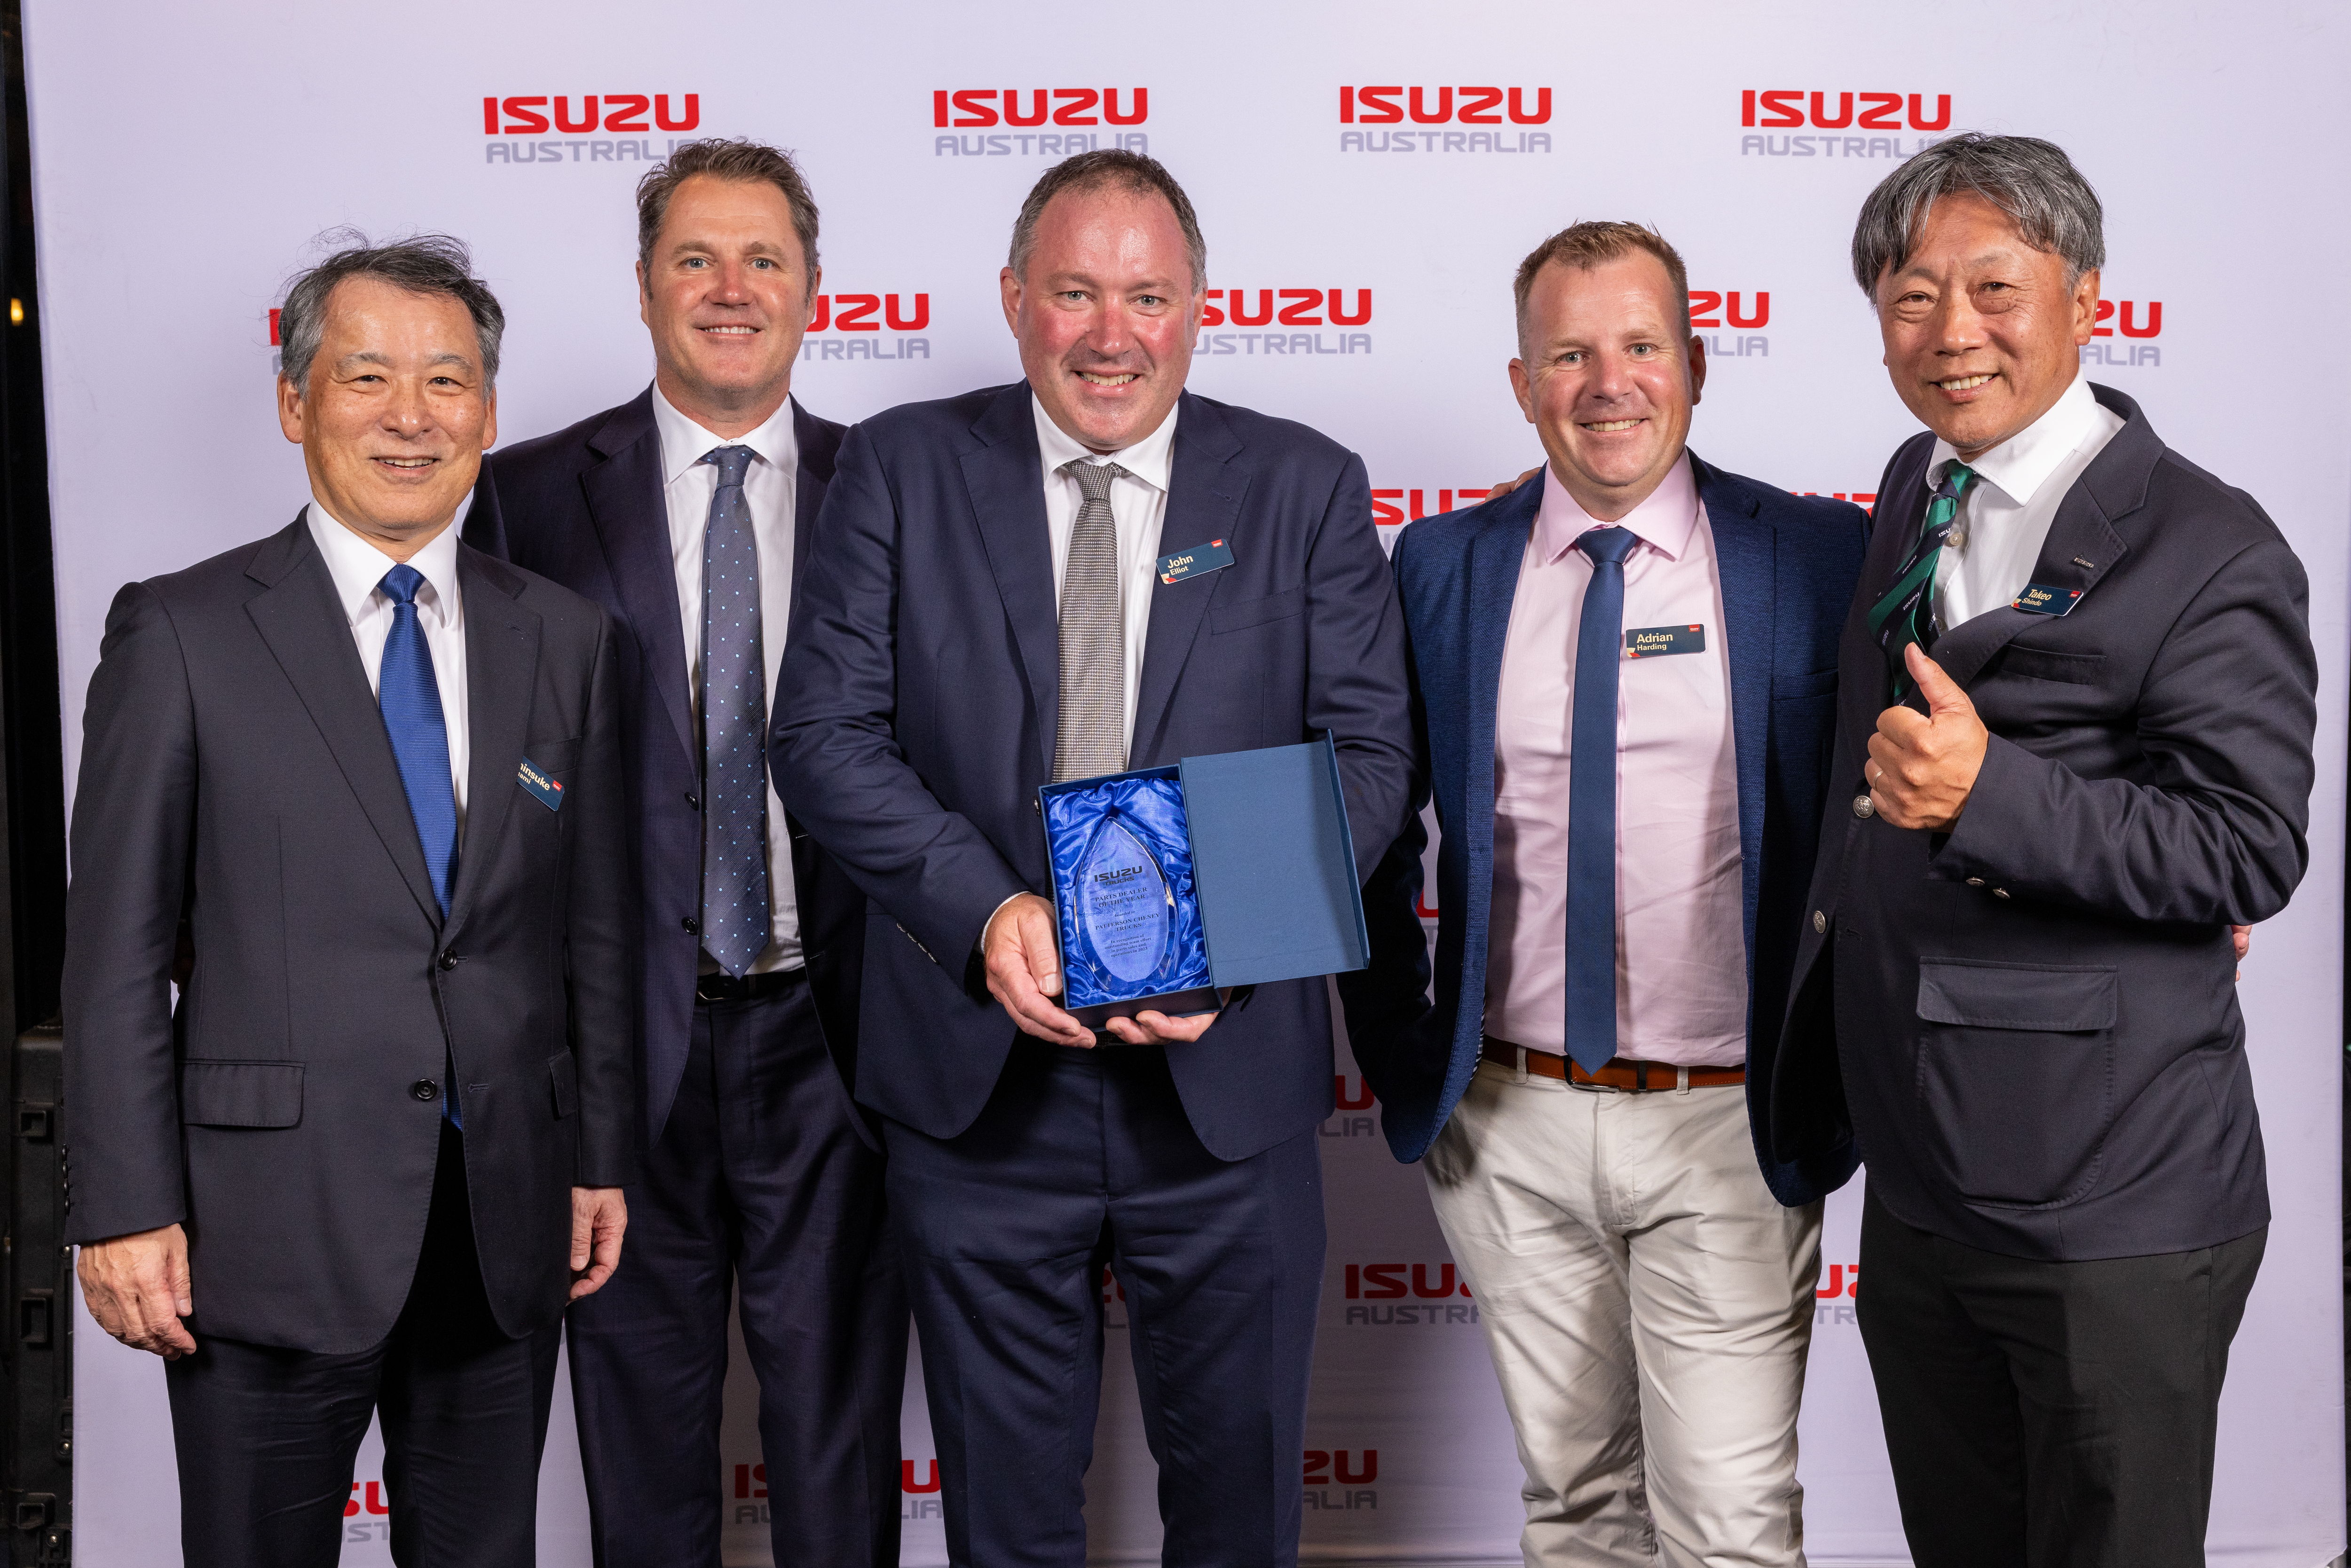 Left to right: IML President, Representative Director and Chief Operating Officer Shinsuke Minami, Patterson Cheney Owner Cameron Bertalli, Patterson Cheney General Manager John Elliot, Patterson Cheney Dealer Principal Adrian Harding, IAL Managing Director & Chief Executive Officer Takeo Shindo